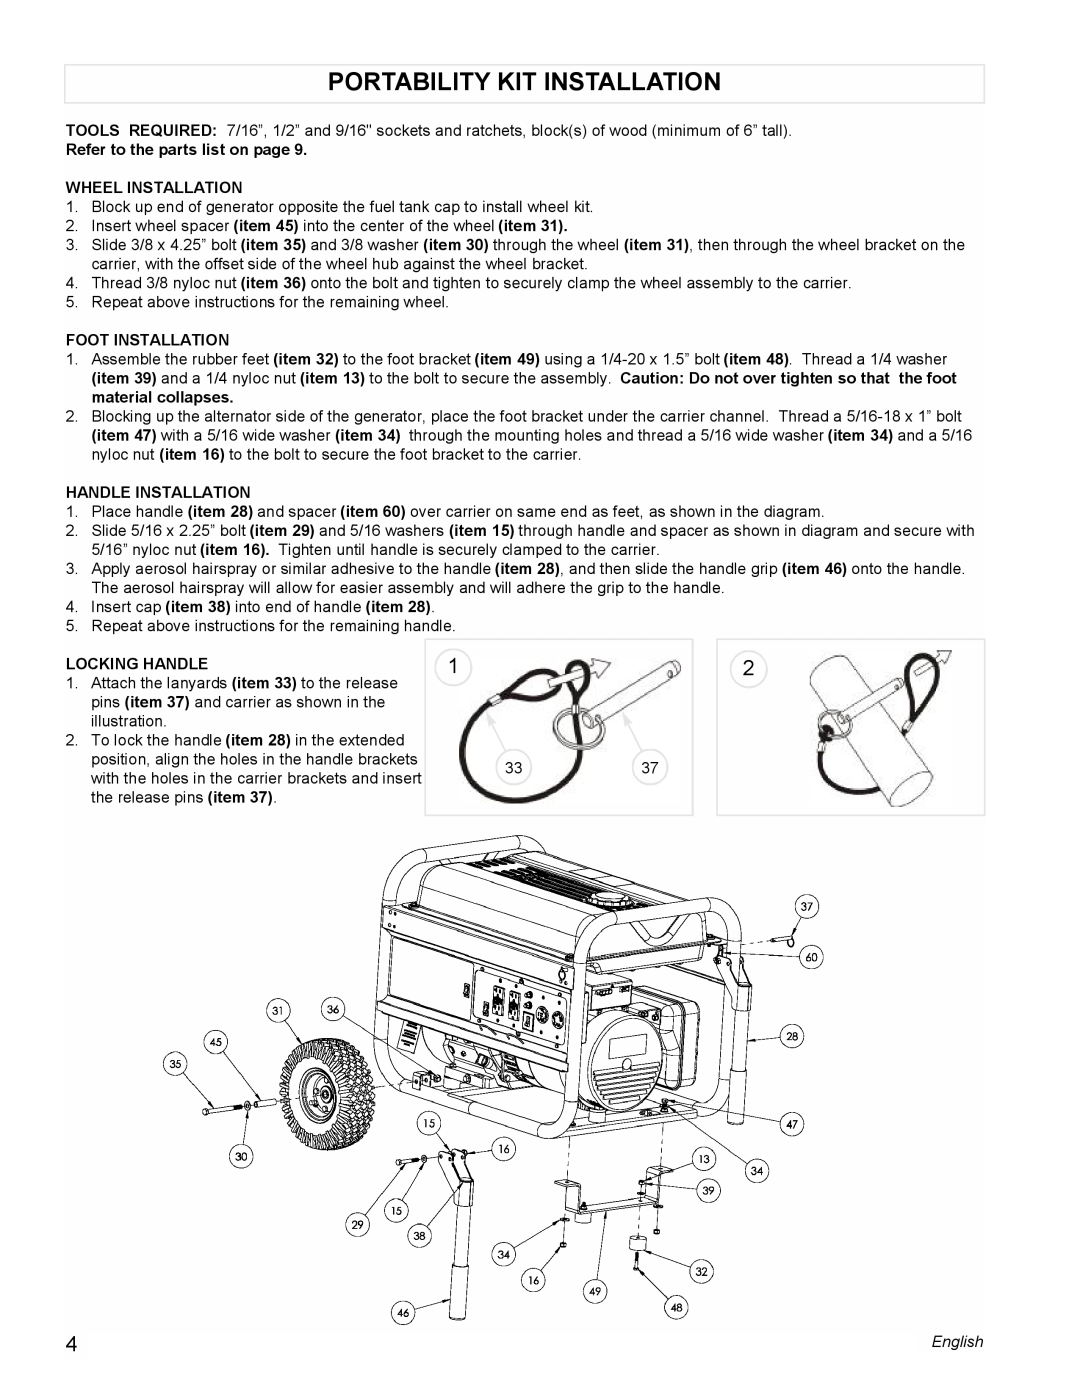 Powermate PMC605000 Portability Kit Installation, Refer to the parts list on page, Wheel Installation, Foot Installation 